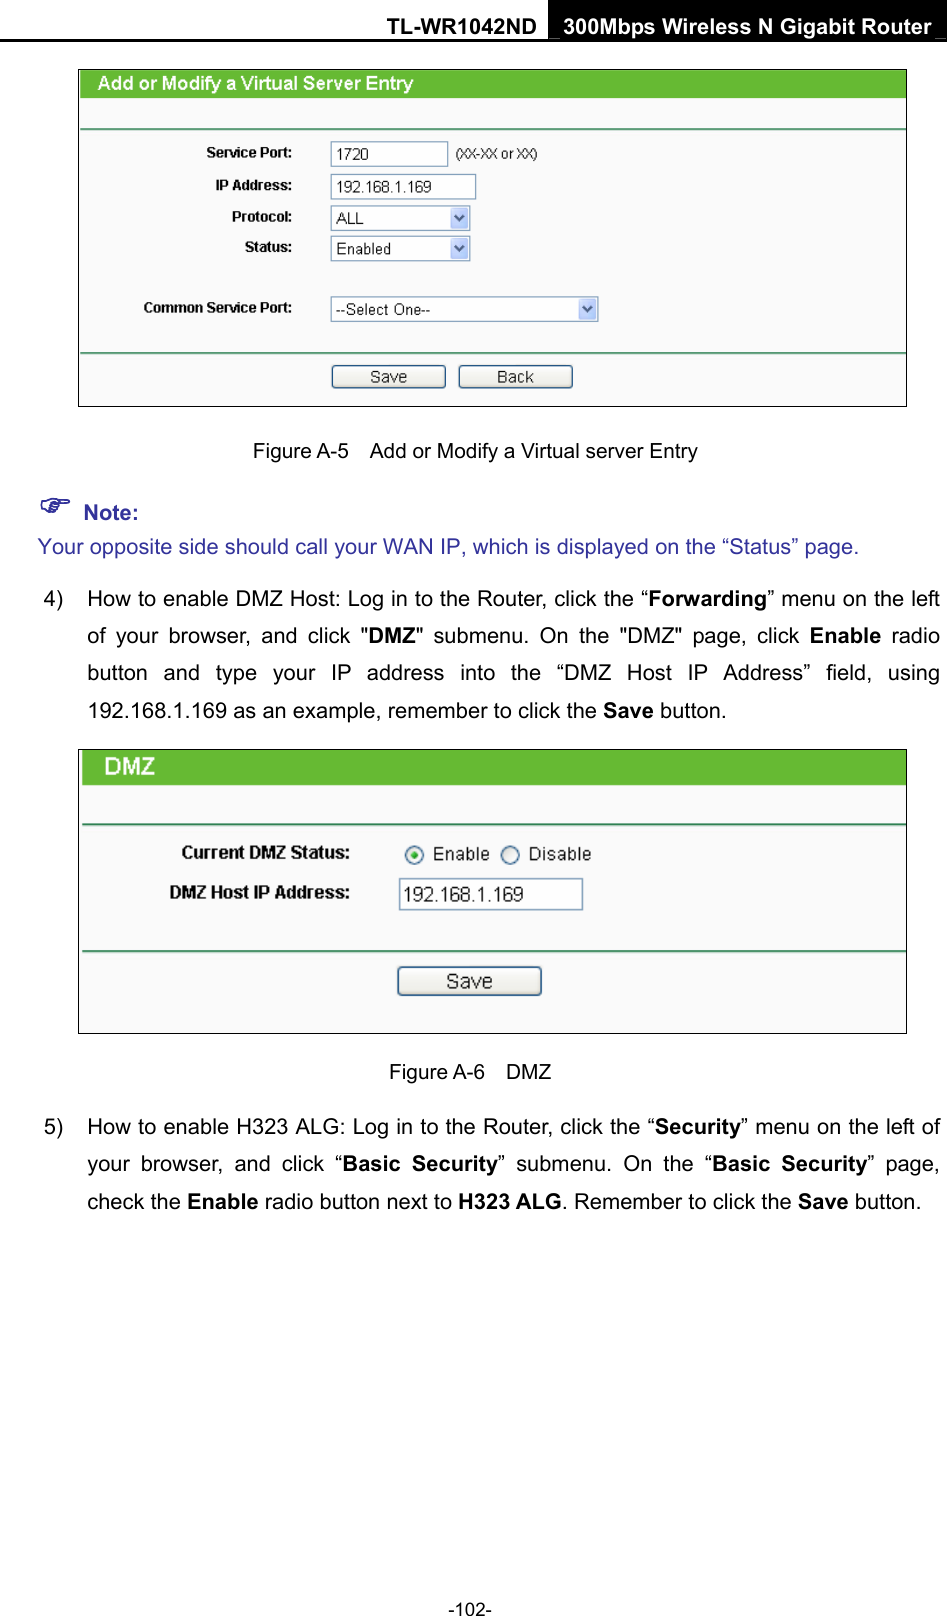 TL-WR1042ND 300Mbps Wireless N Gigabit Router -102-   Figure A-5    Add or Modify a Virtual server Entry ) Note: Your opposite side should call your WAN IP, which is displayed on the “Status” page. 4)  How to enable DMZ Host: Log in to the Router, click the “Forwarding” menu on the left of your browser, and click &quot;DMZ&quot; submenu. On the &quot;DMZ&quot; page, click Enable radio button and type your IP address into the “DMZ Host IP Address” field, using 192.168.1.169 as an example, remember to click the Save button.    Figure A-6  DMZ 5)  How to enable H323 ALG: Log in to the Router, click the “Security” menu on the left of your browser, and click “Basic Security” submenu. On the “Basic Security” page, check the Enable radio button next to H323 ALG. Remember to click the Save button. 